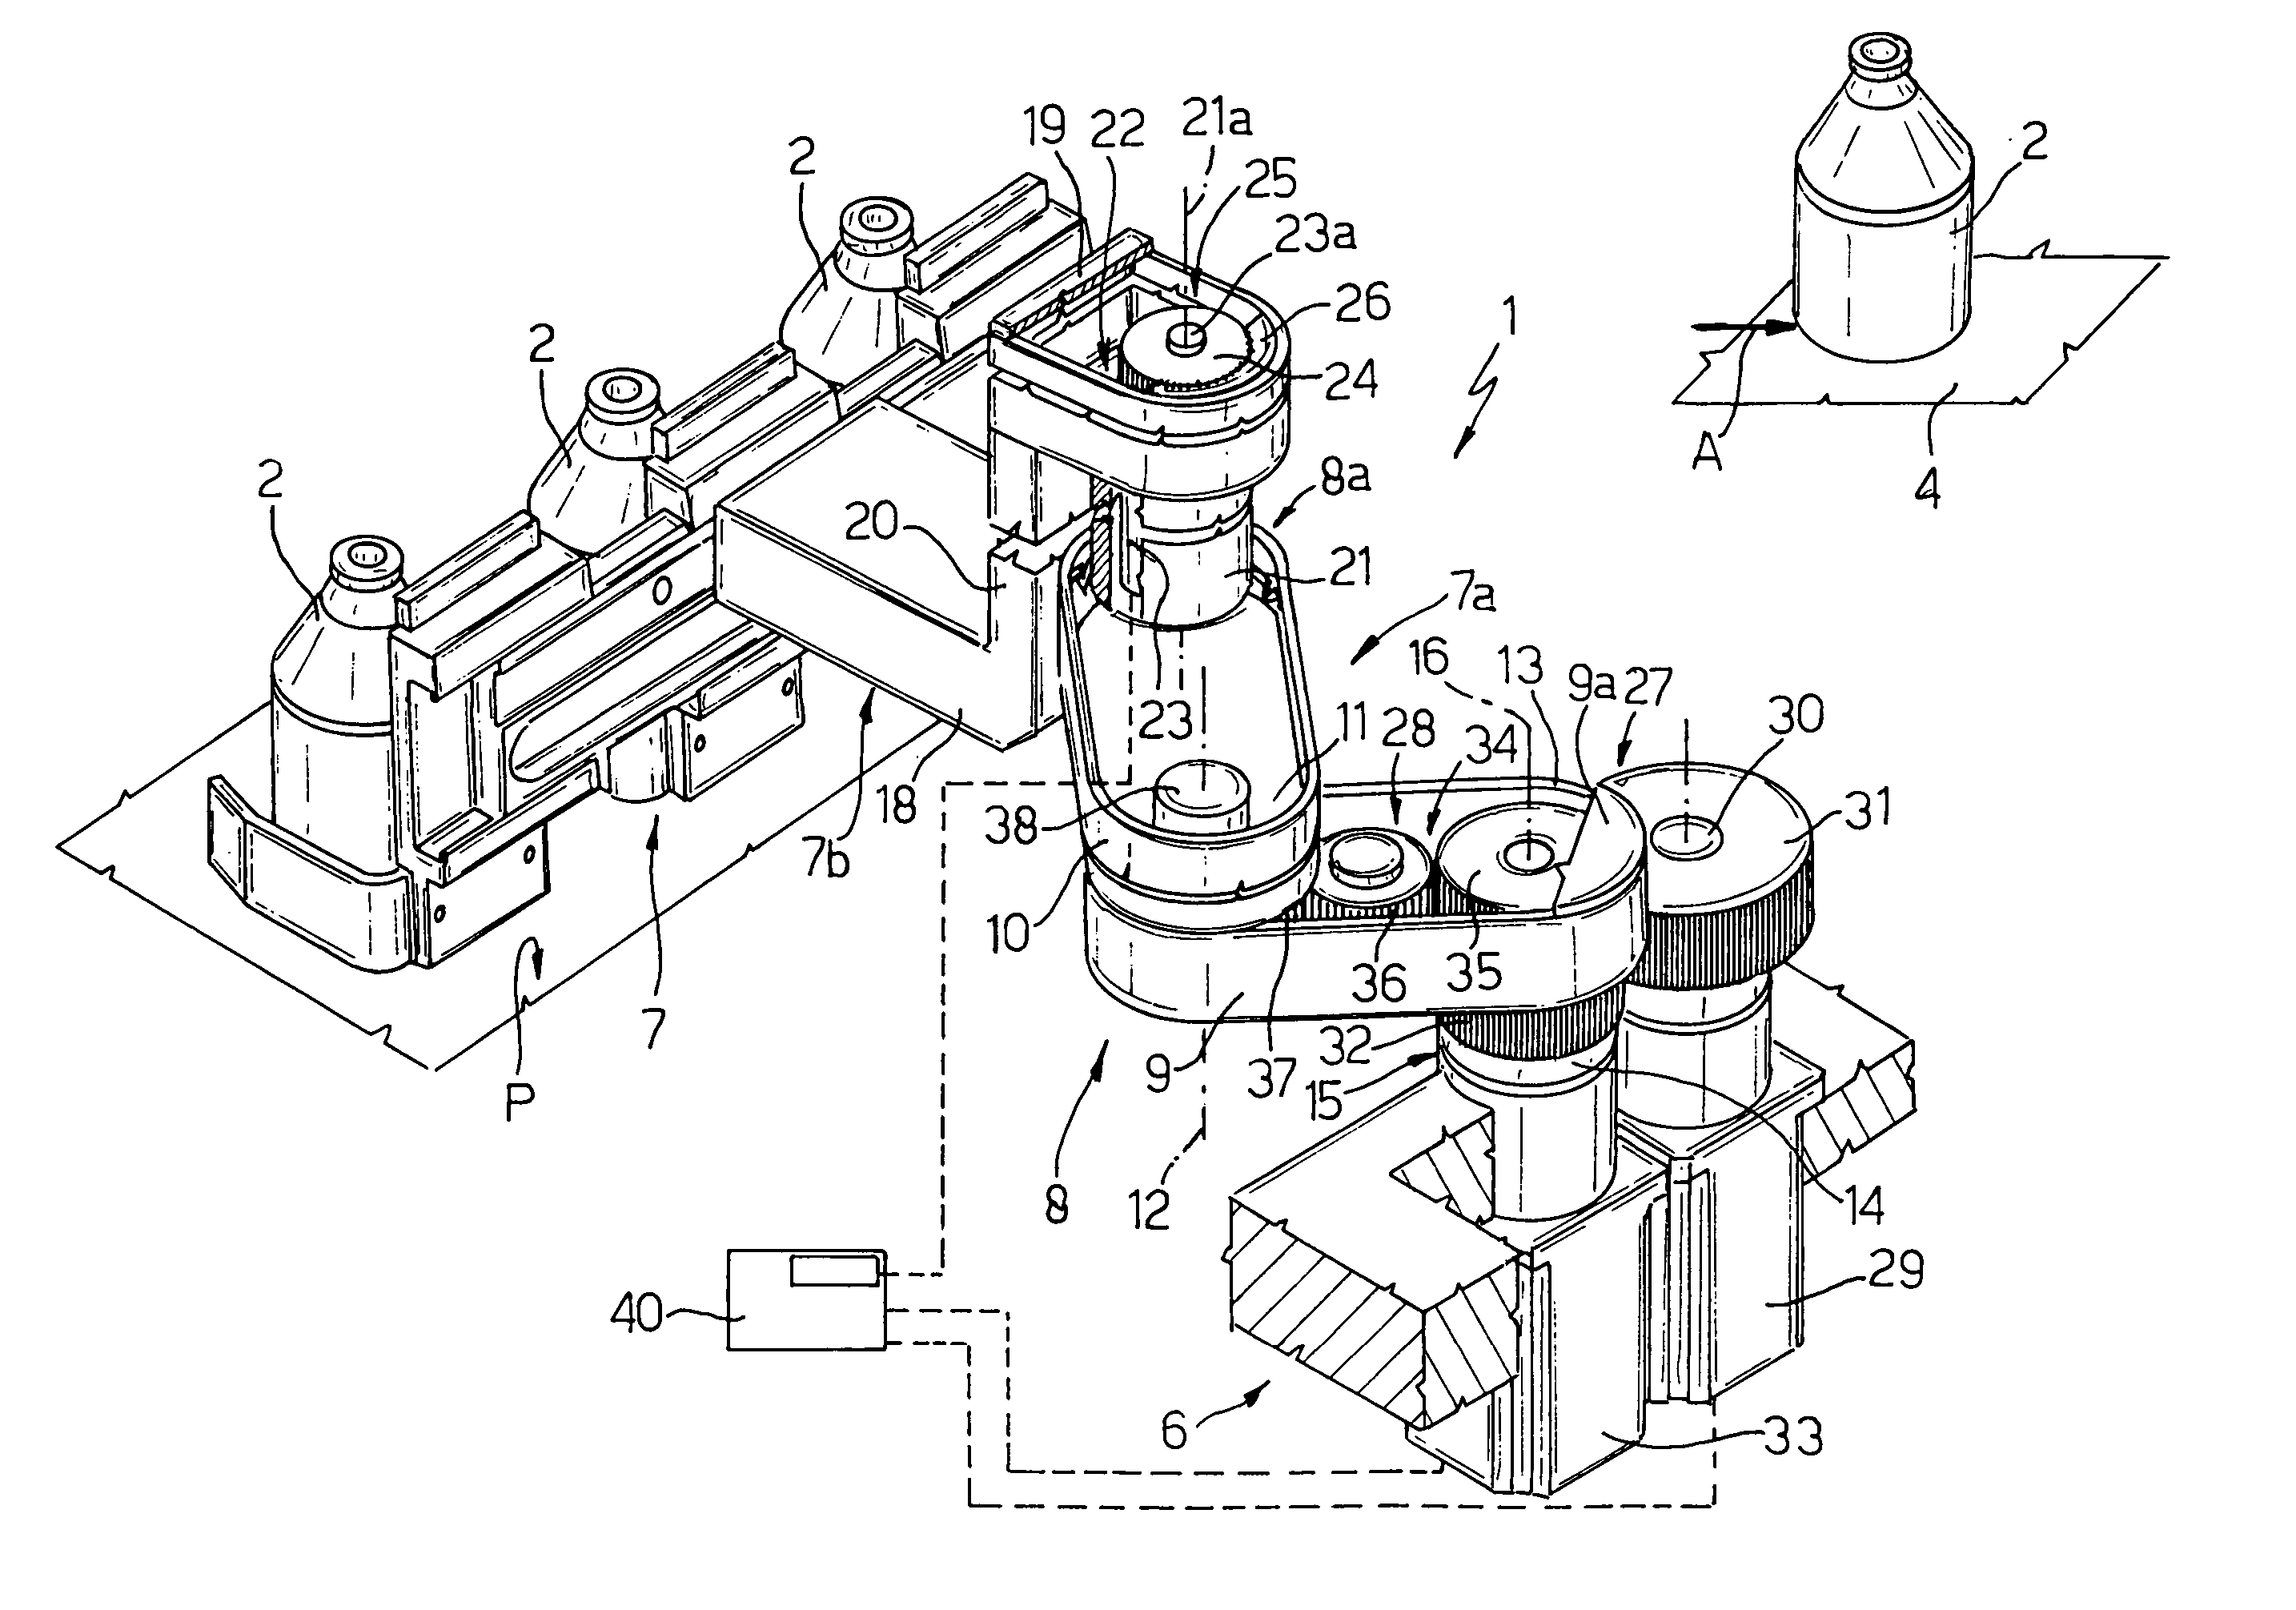 Transfer unit for transferring glass articles